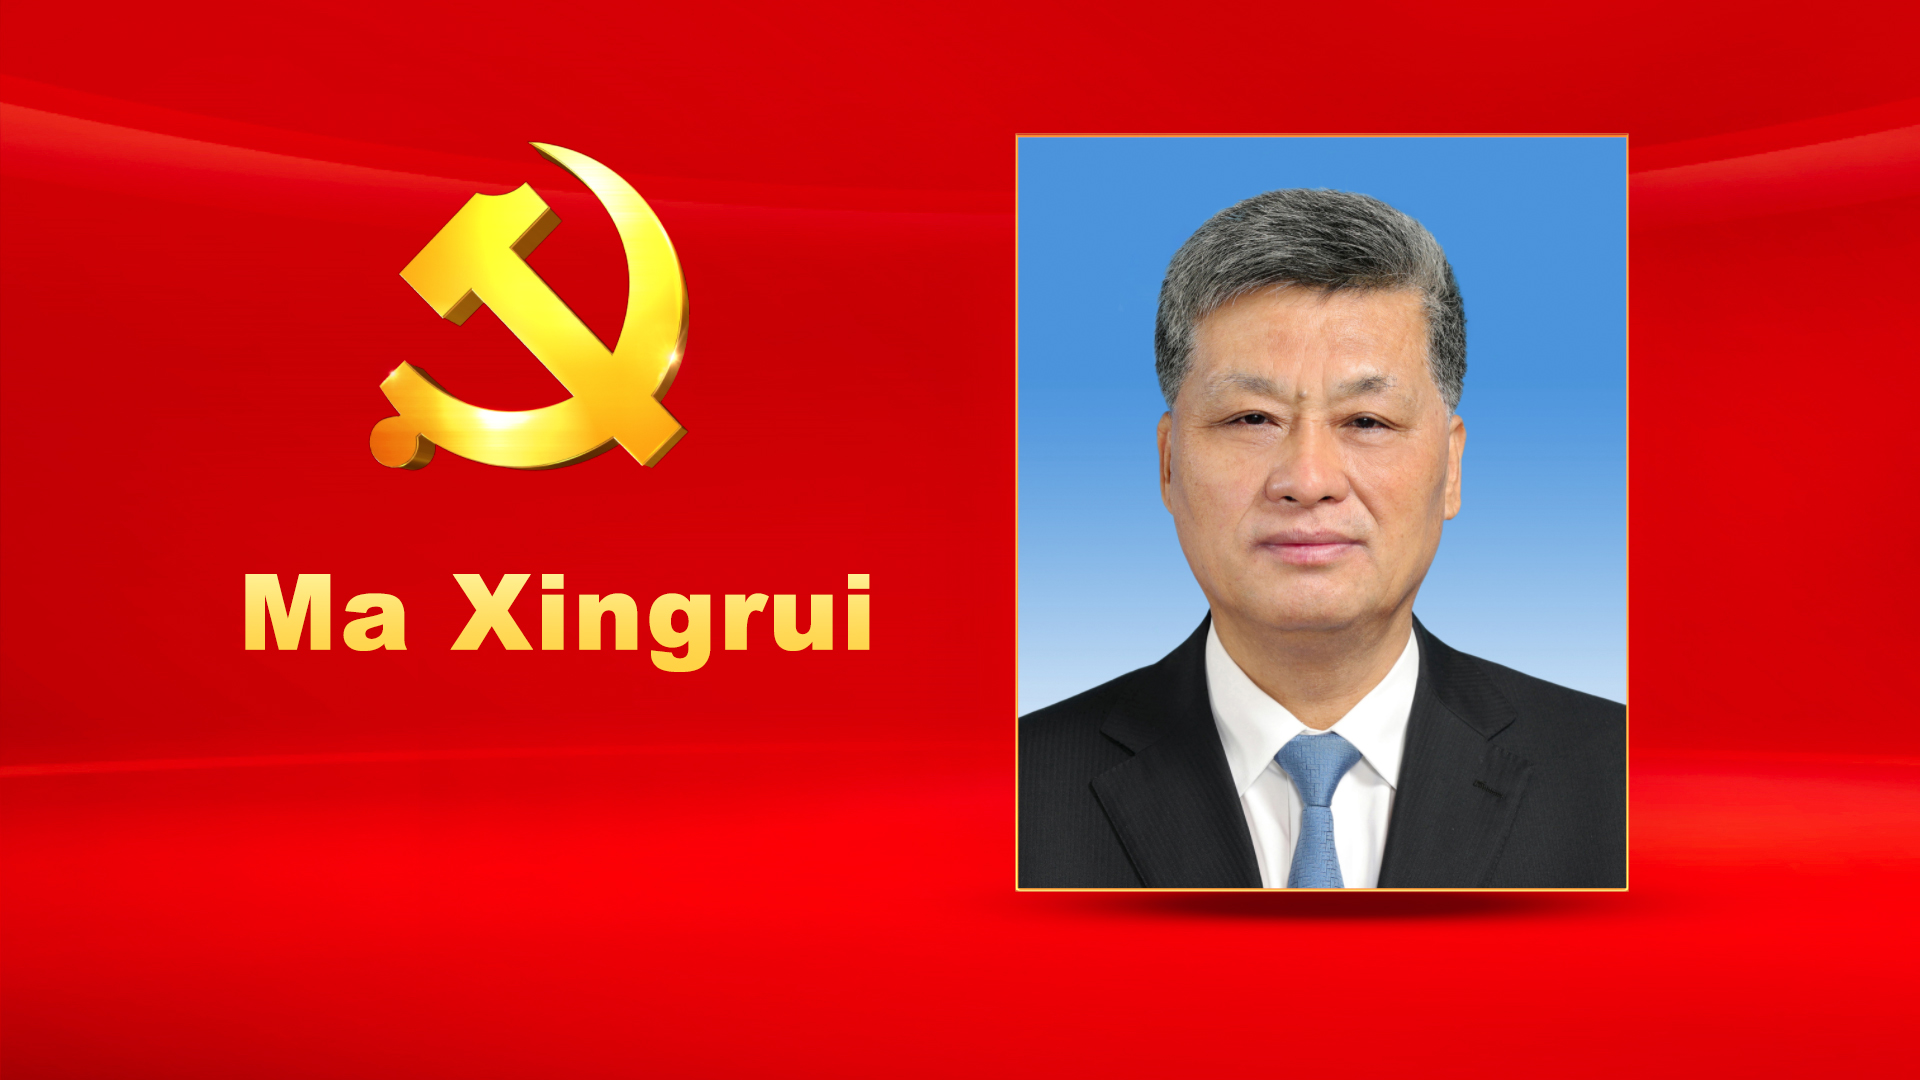 Ma Xingrui, male, Han ethnicity, was born in October 1959 and is from Yuncheng, Shandong Province. He began his first job in March 1988 and joined the Communist Party of China (CPC) in January 1988. Ma graduated from Flight Dynamics Research Laboratory, Harbin Institute of Technology where he completed a graduate program in general mechanics. He holds a Doctor of Engineering degree and a professional title of professor. Ma is currently a member of the CPC Central Committee Political Bureau, Secretary of the CPC Xinjiang Uygur Autonomous Regional Committee, and First Political Commissar of the Xinjiang Production and Construction Corps.